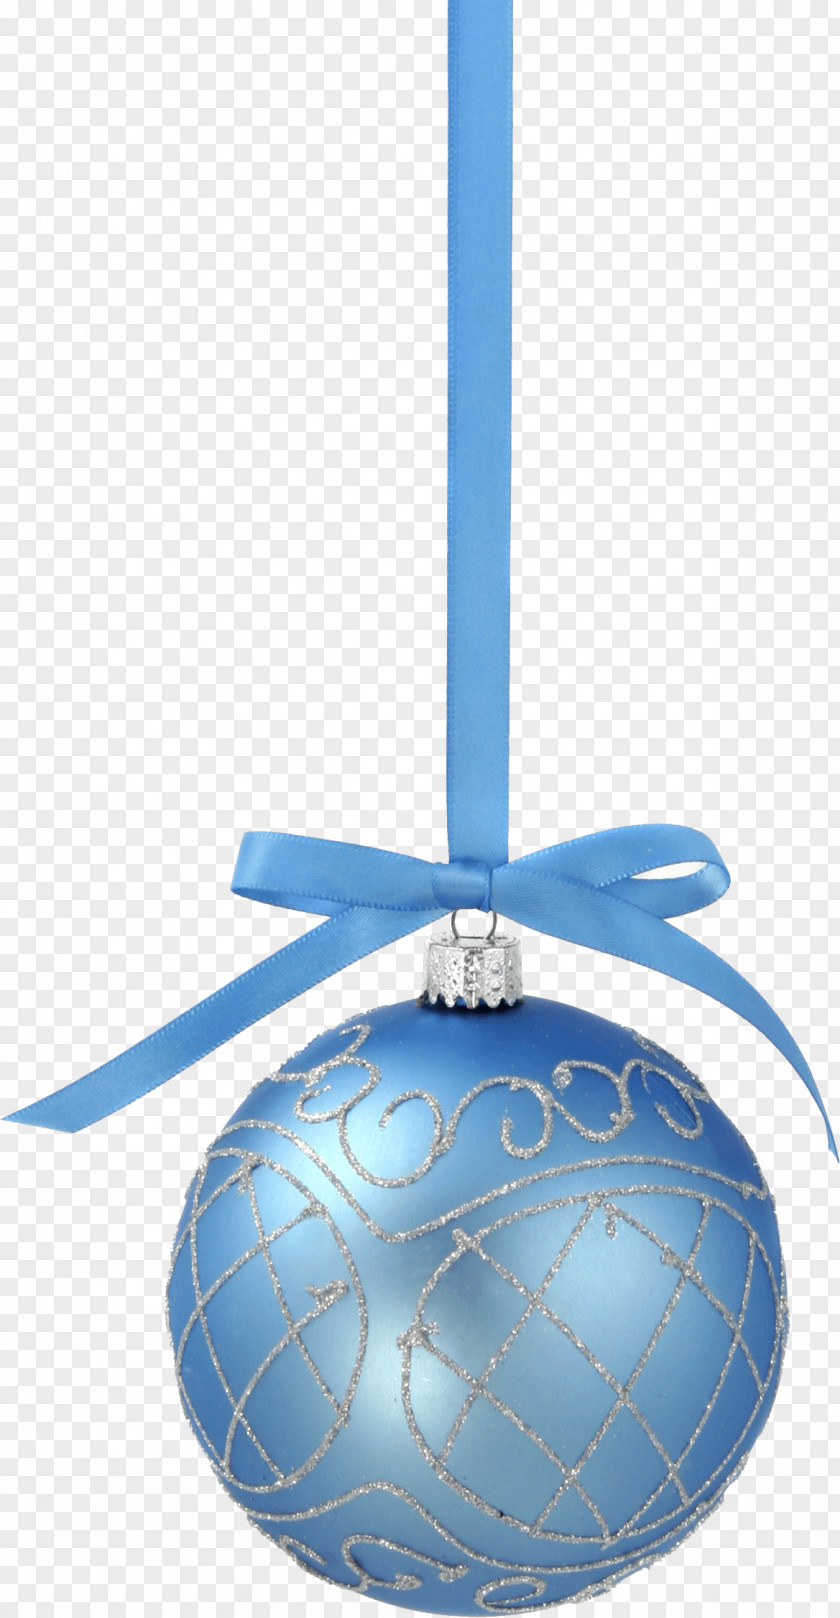 Christmas Ball Toy Image Ornament Clip Art PNG